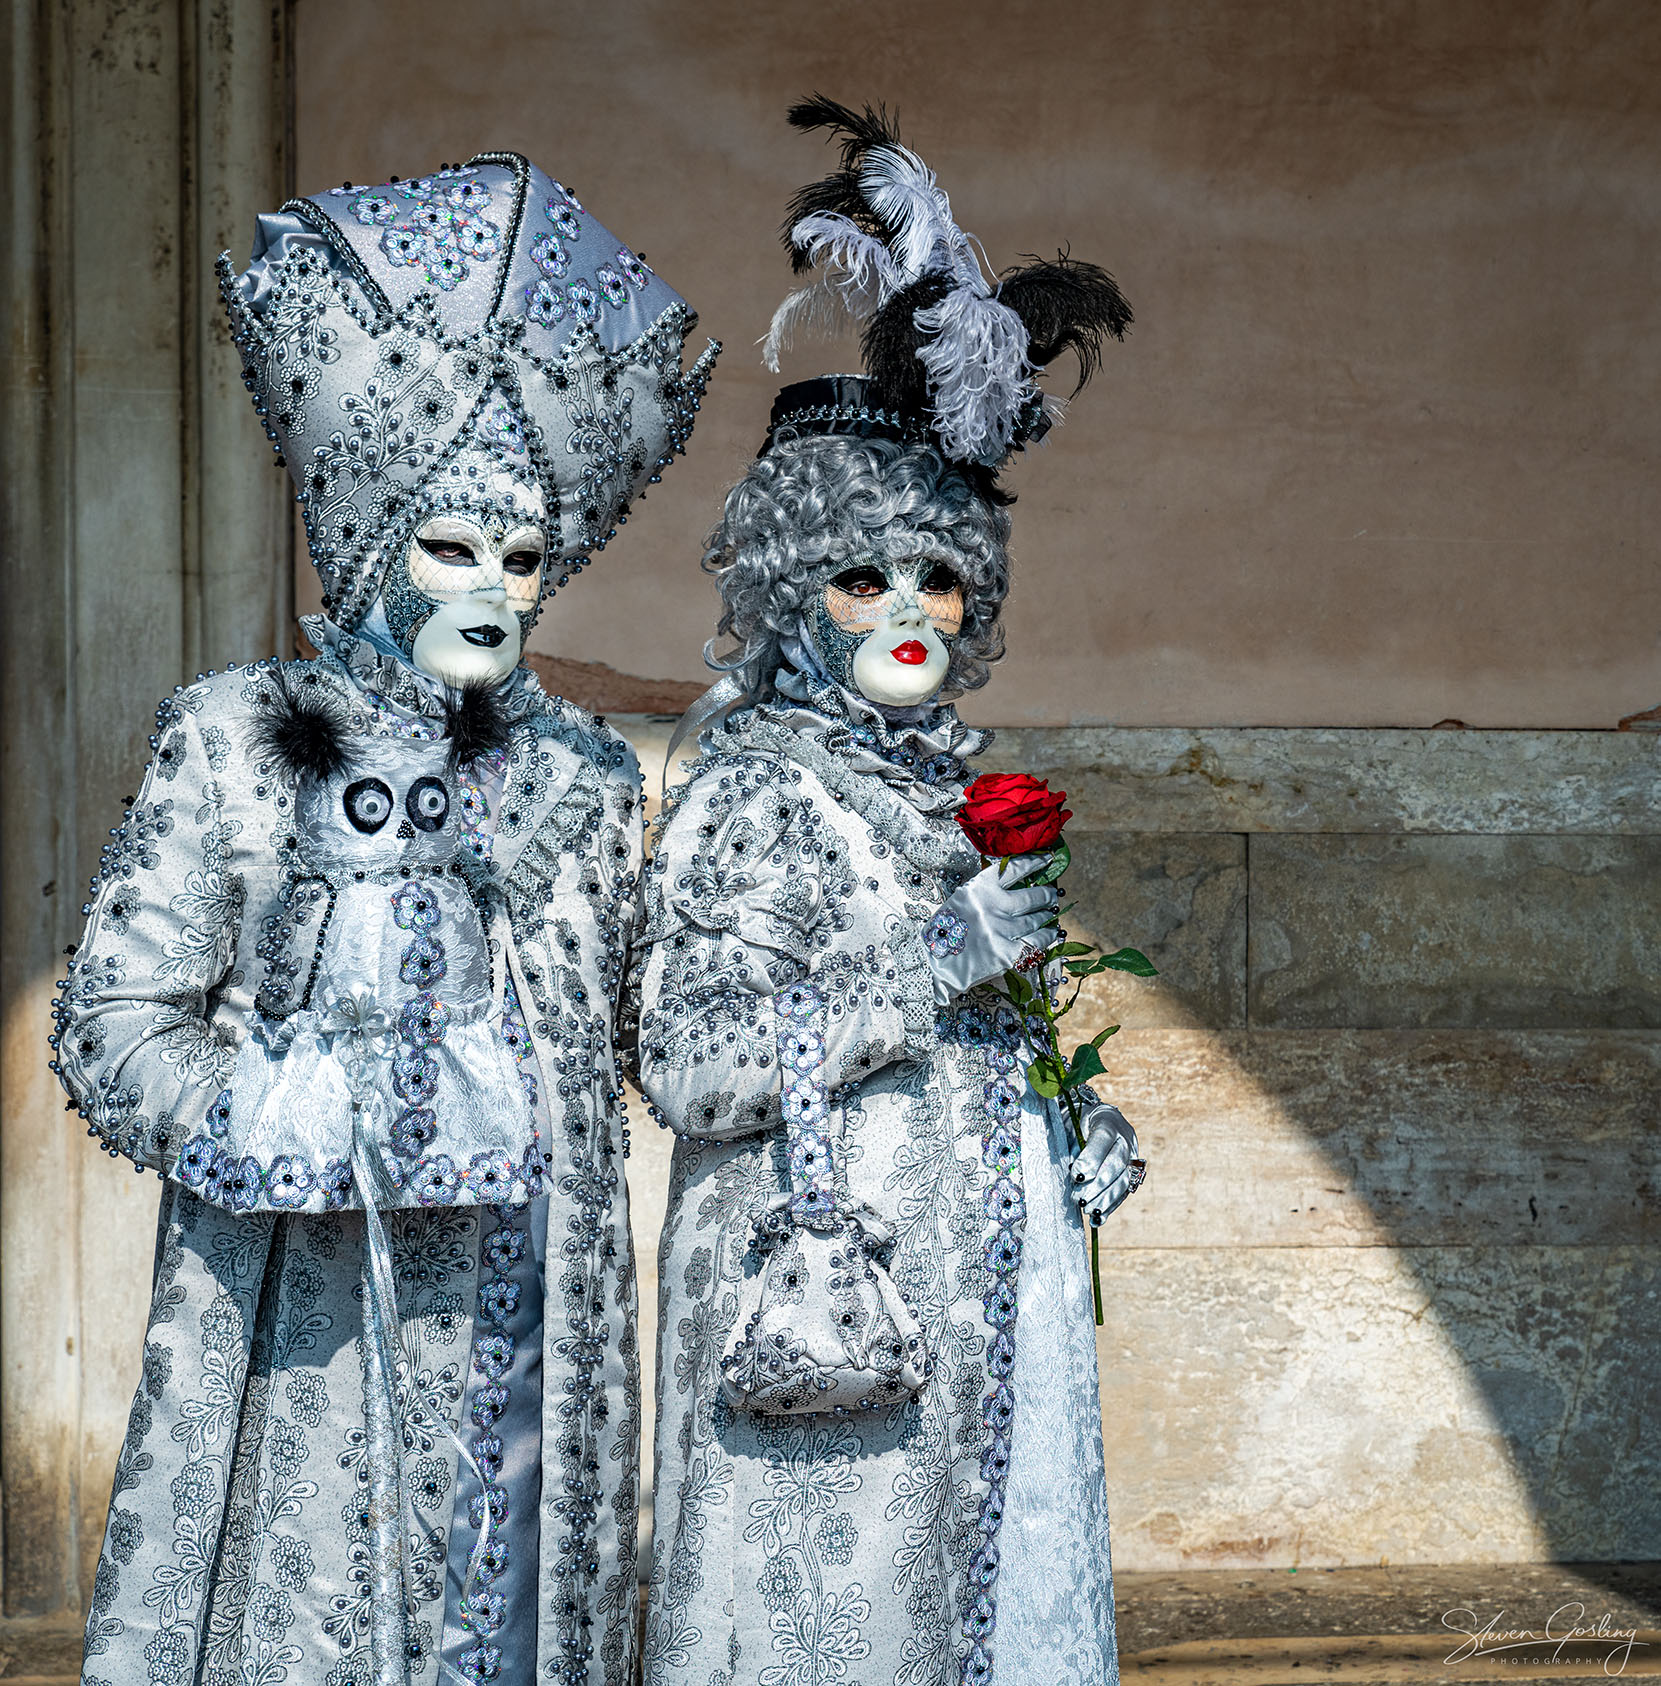 Ballet & Ball Gowns Photography Workshop at the Venice Carnival 154